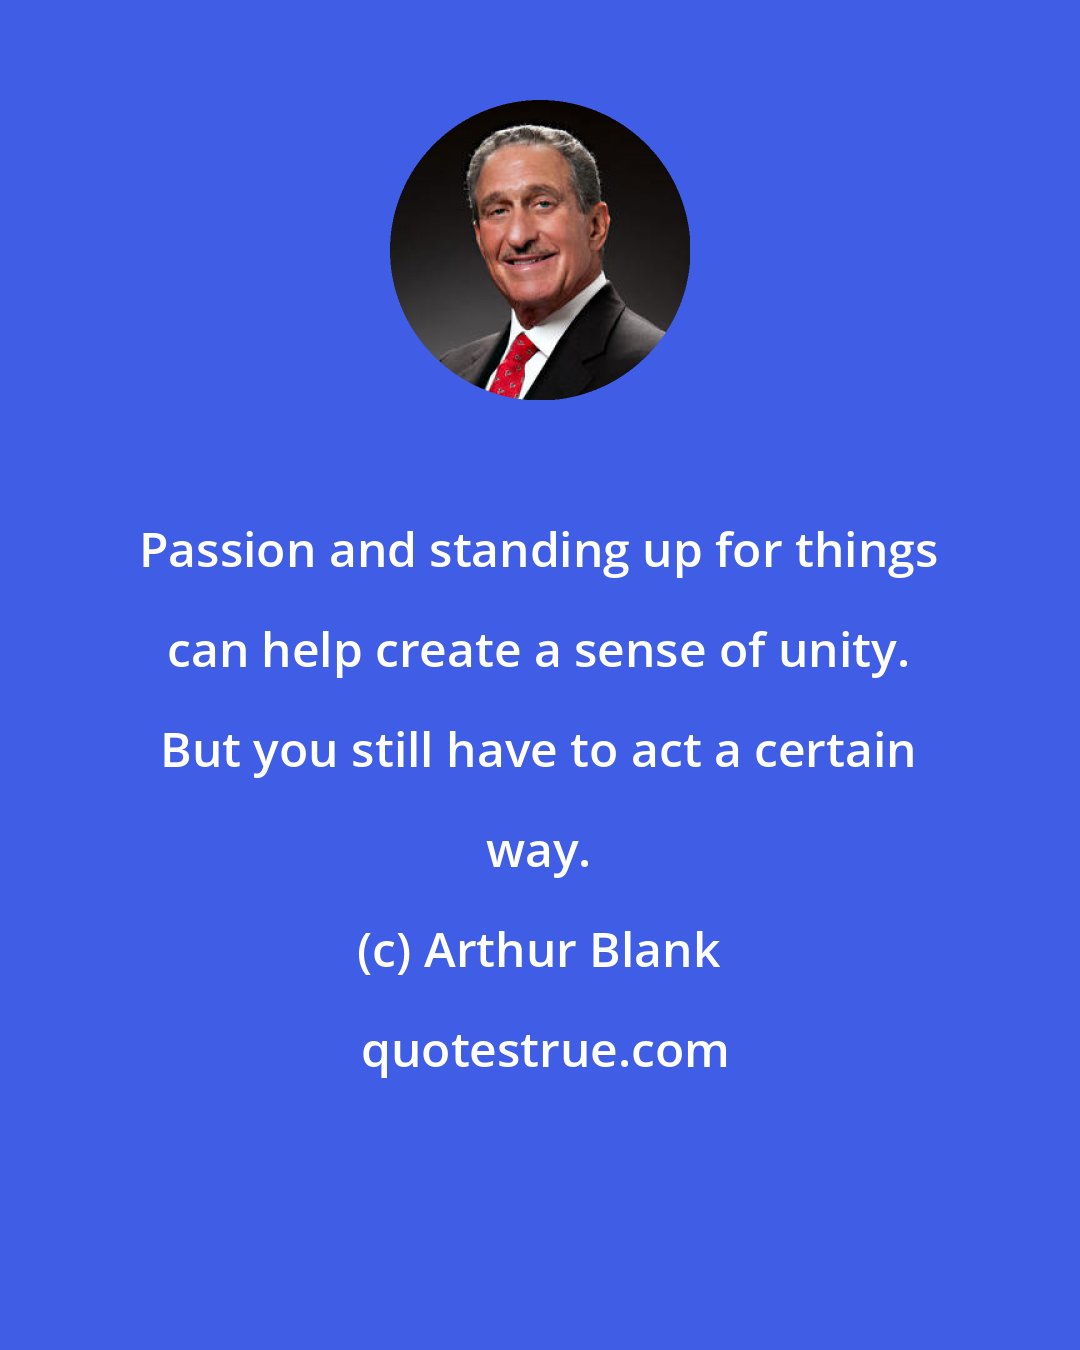 Arthur Blank: Passion and standing up for things can help create a sense of unity. But you still have to act a certain way.